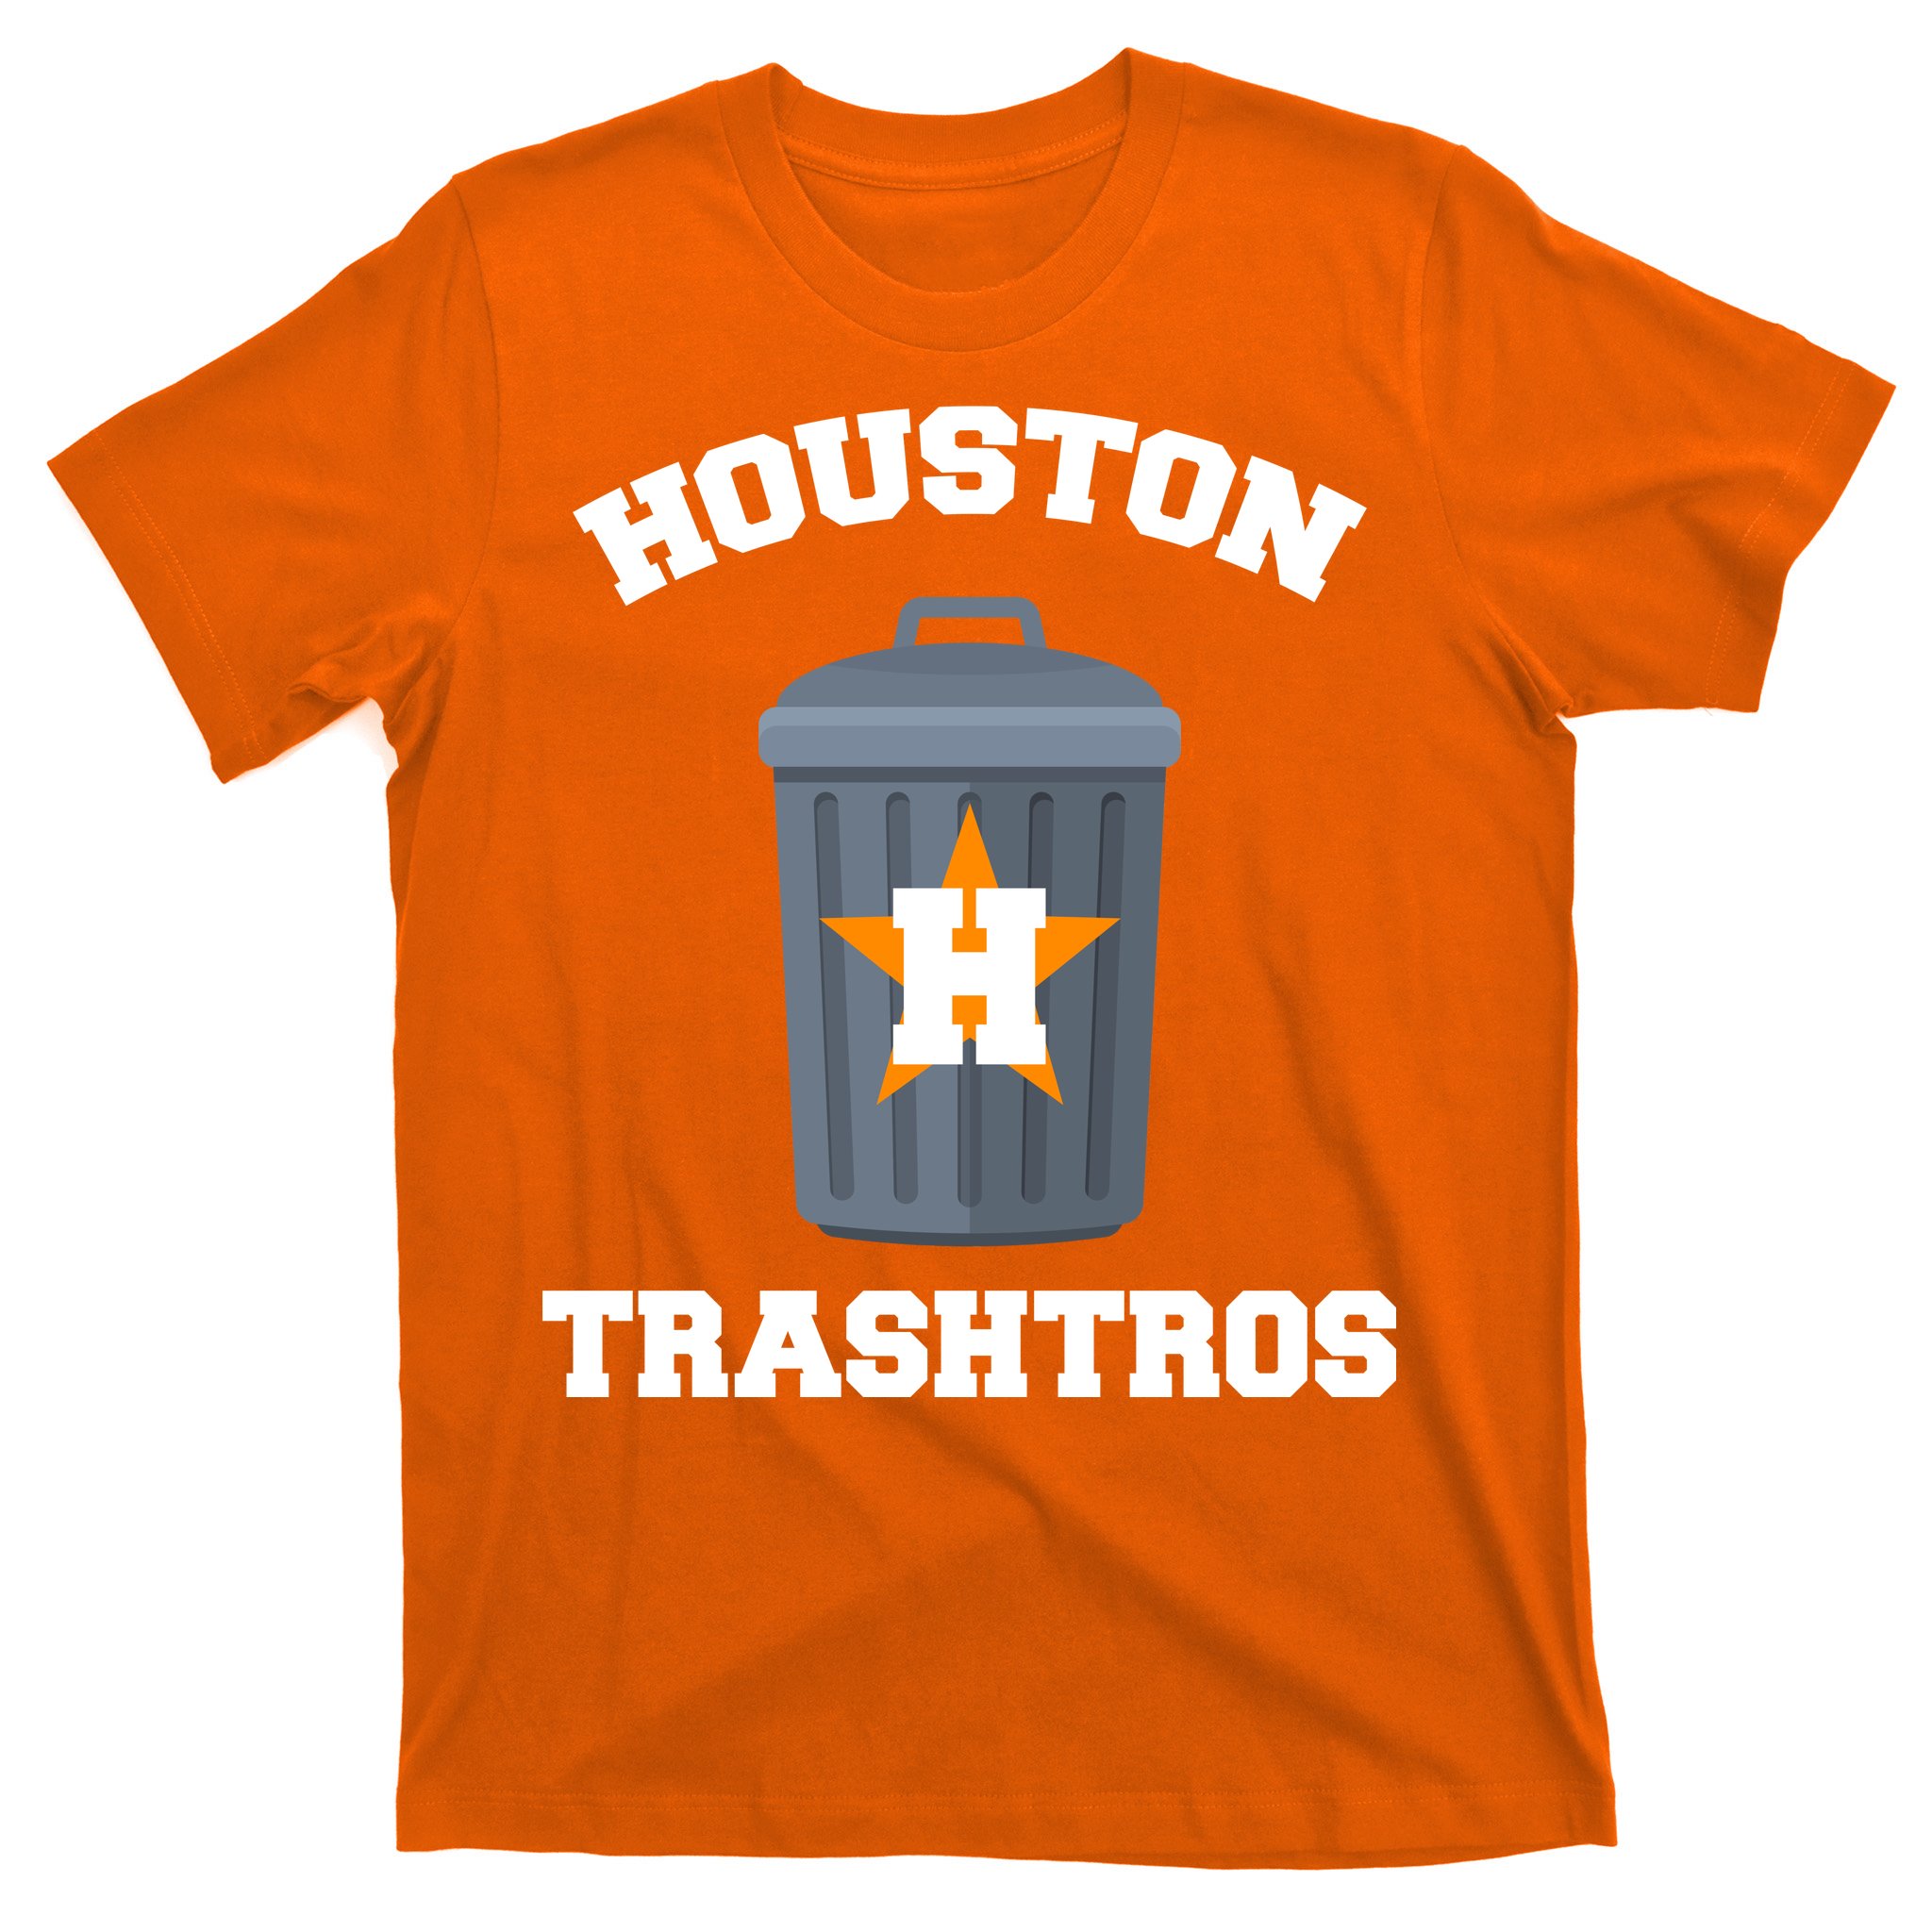 You Want Fry's with That? Houston Trashtros T-Shirt